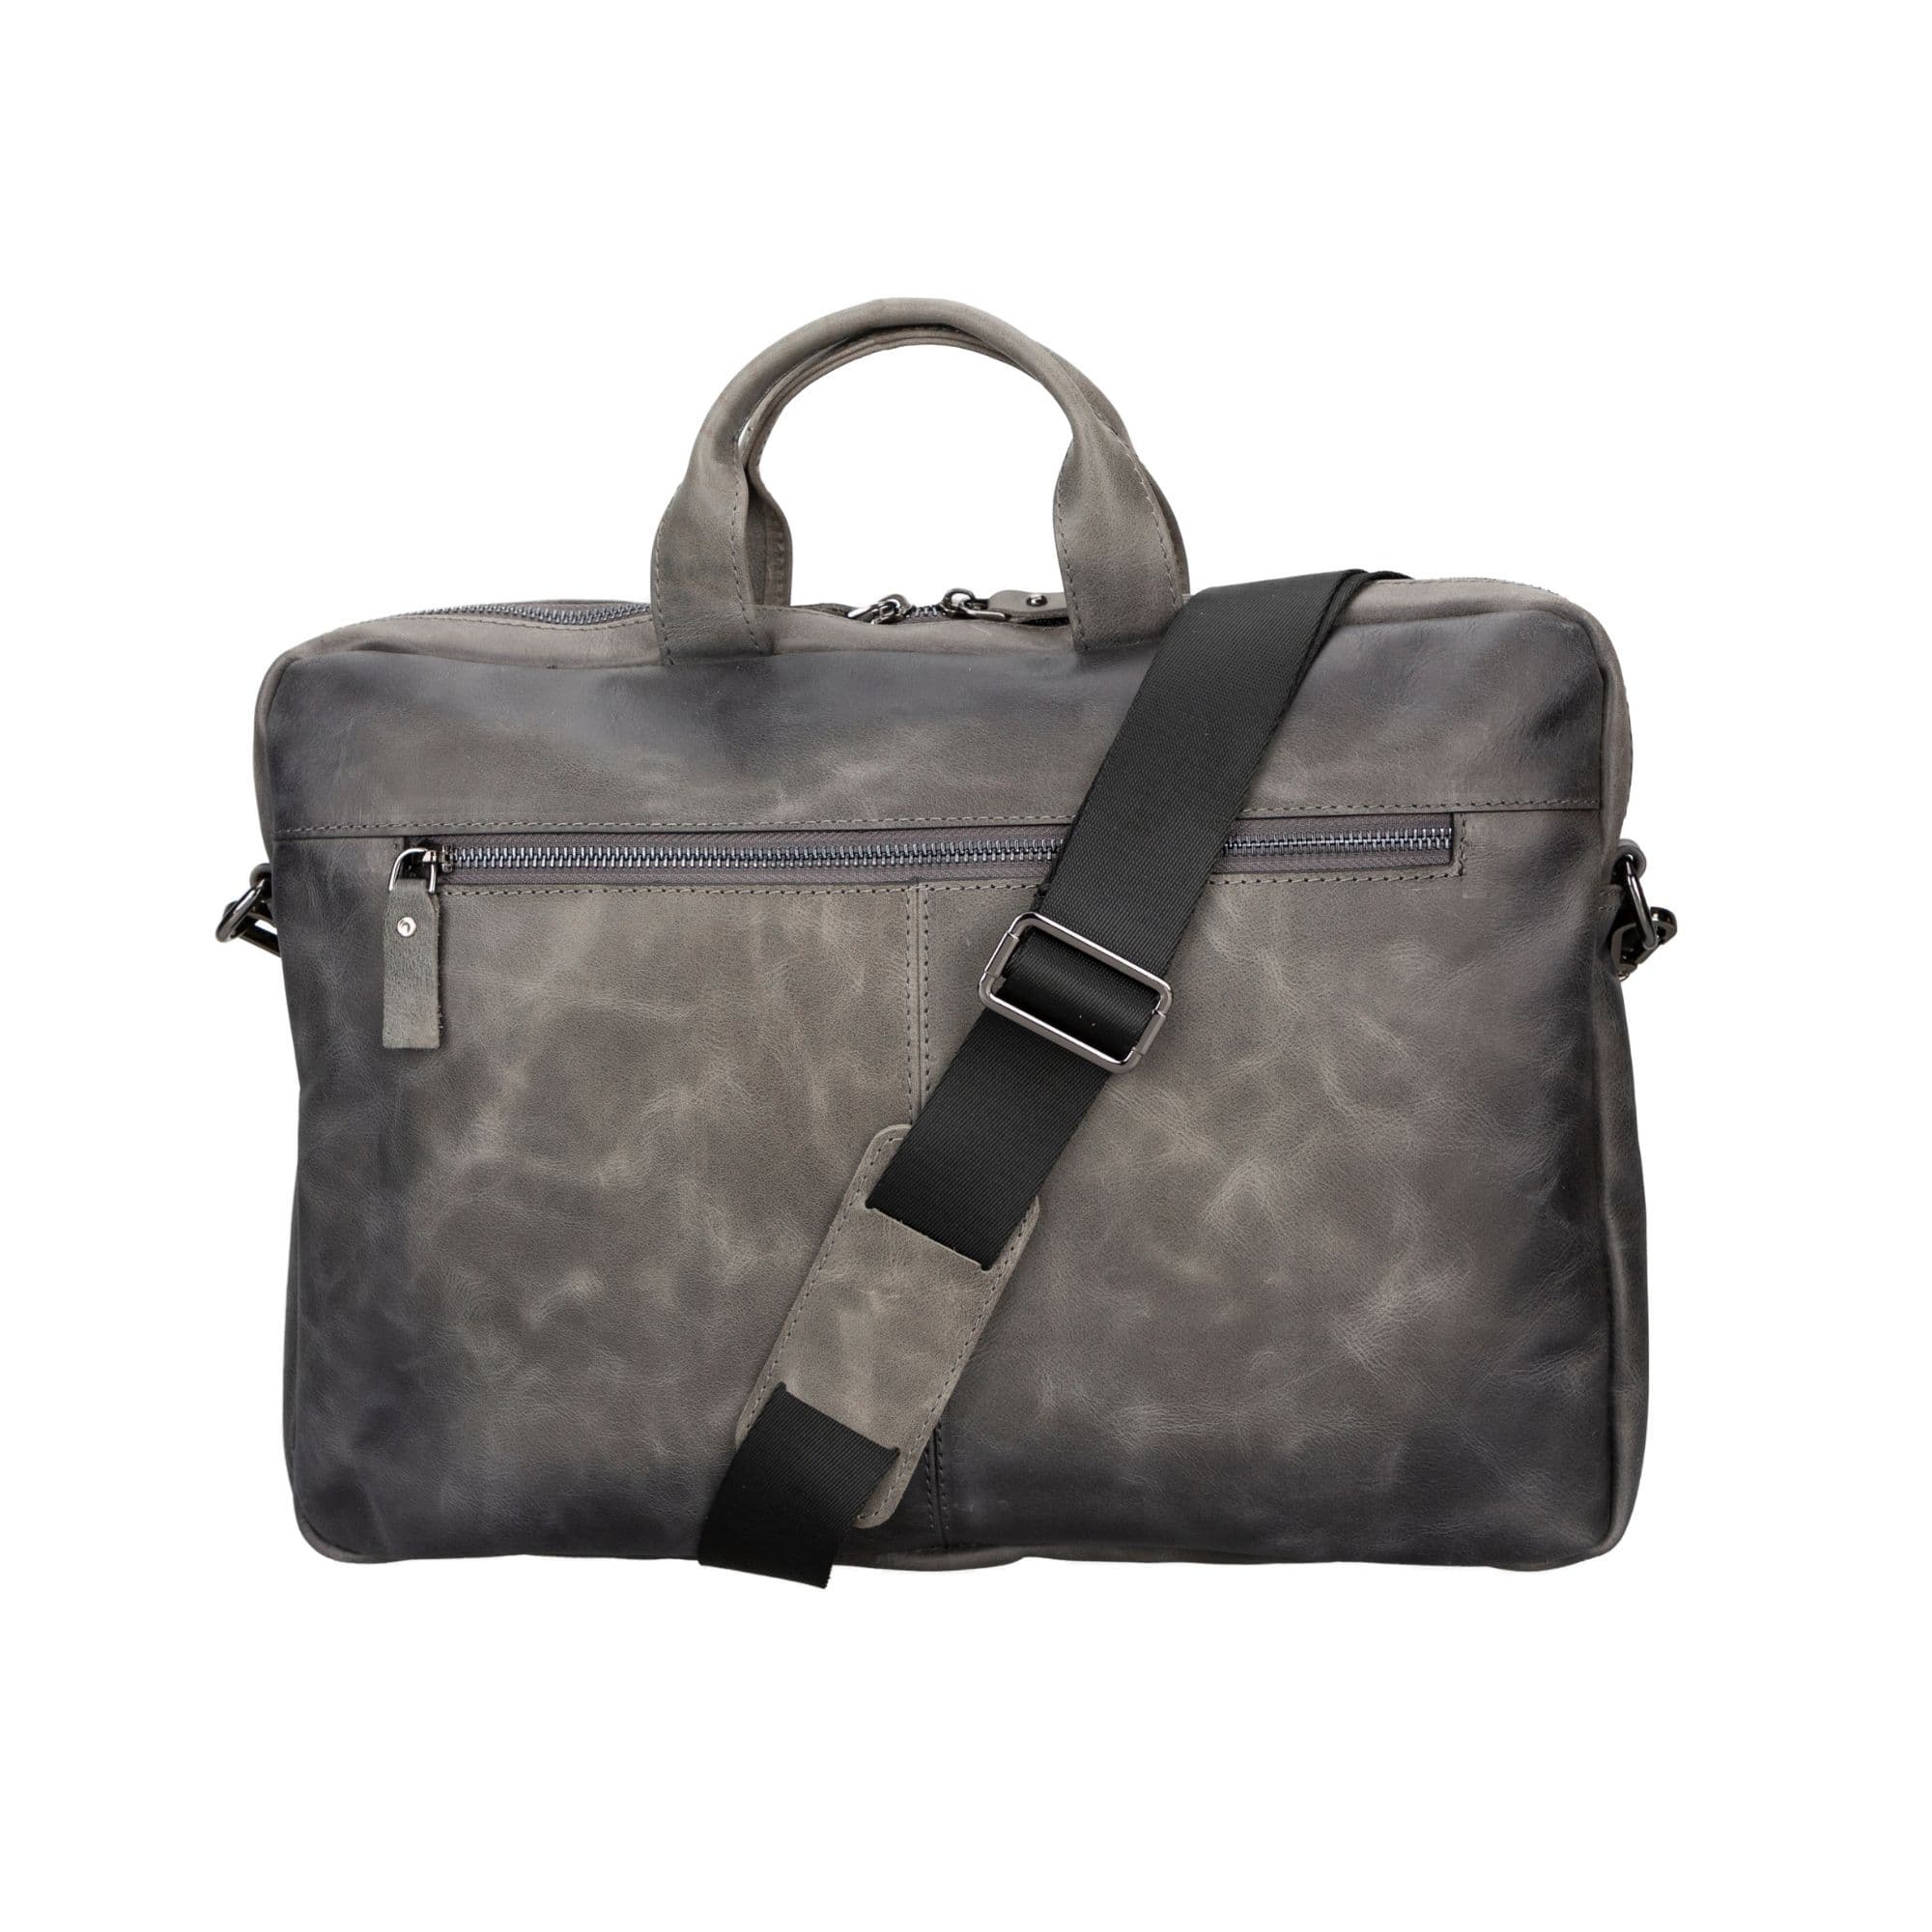 Afton MacBook Leather Sleeve and Bag - 14 Inches - Gray - TORONATA